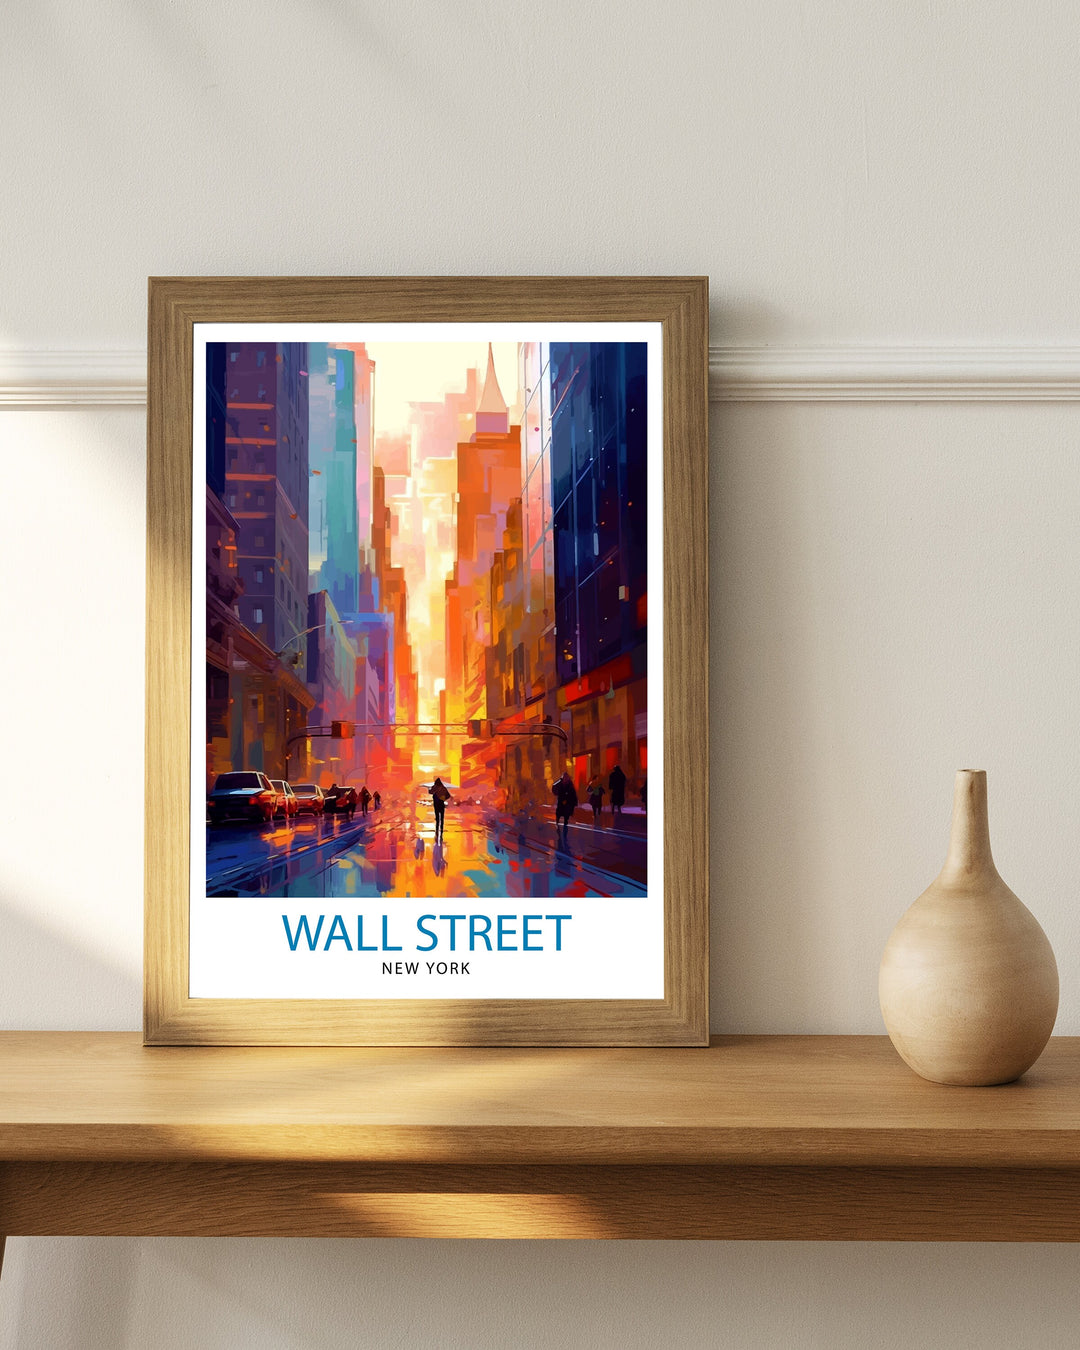 Wall Street New York City Poster Financial District Wall Decor Wall Street Poster NYC Travel Posters New York City Art Poster Wall Street